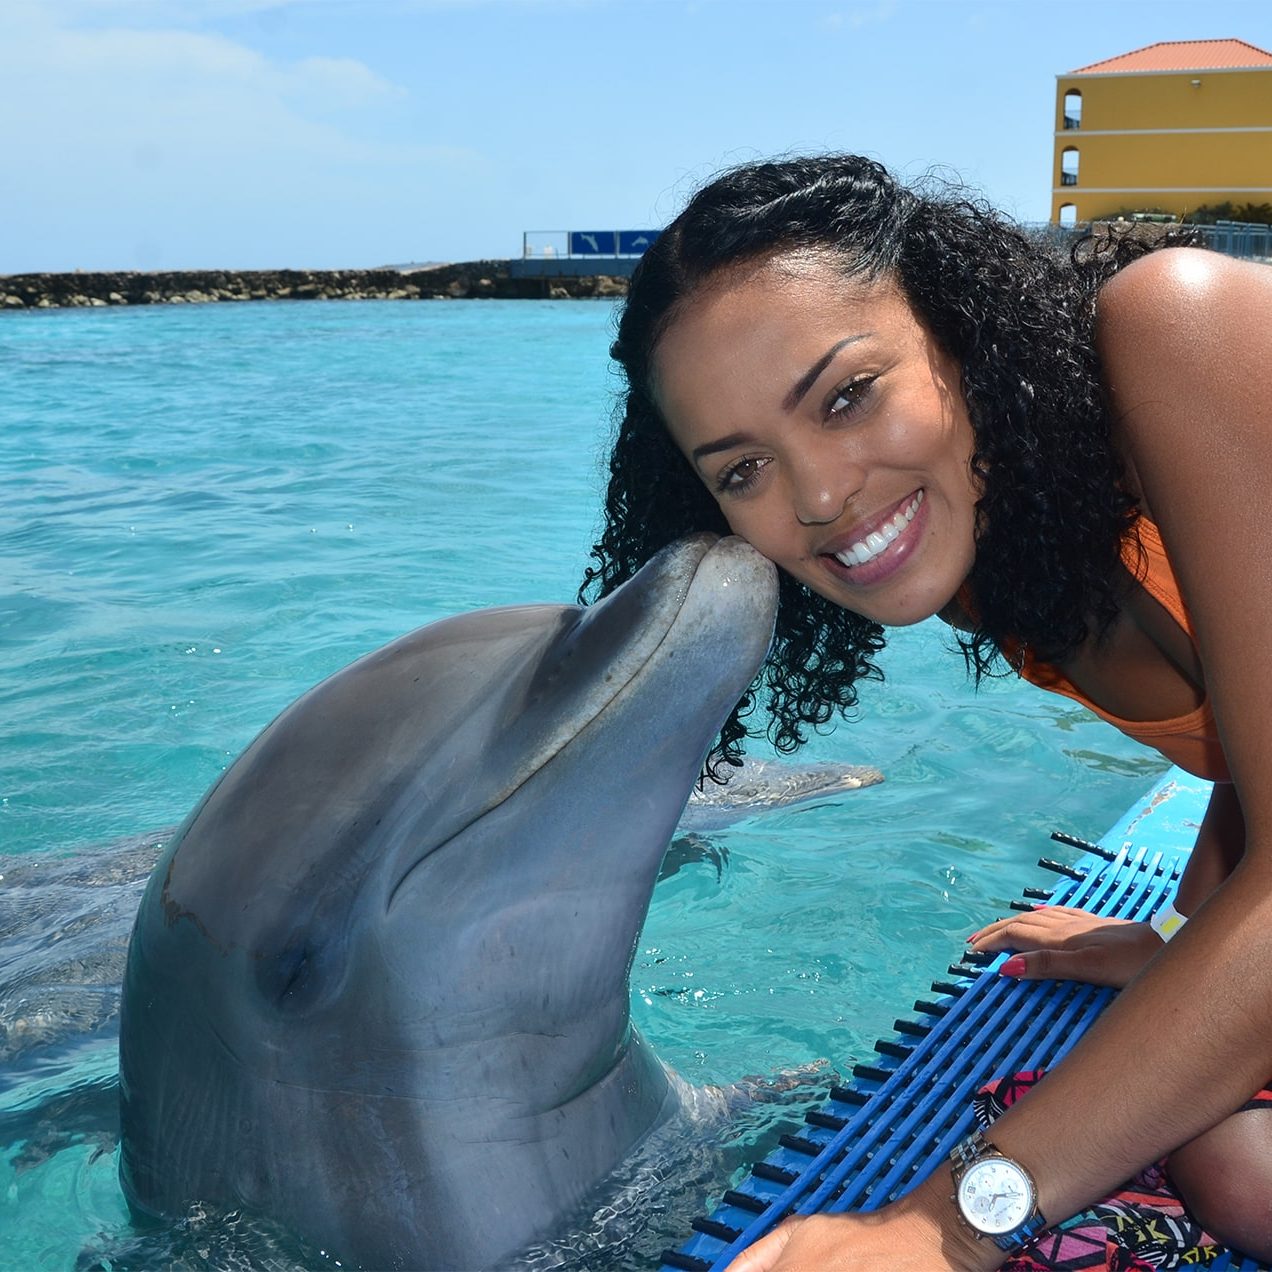 Female tourist receives a kiss from a dolphin at the Dolphin Academy Curaçao.